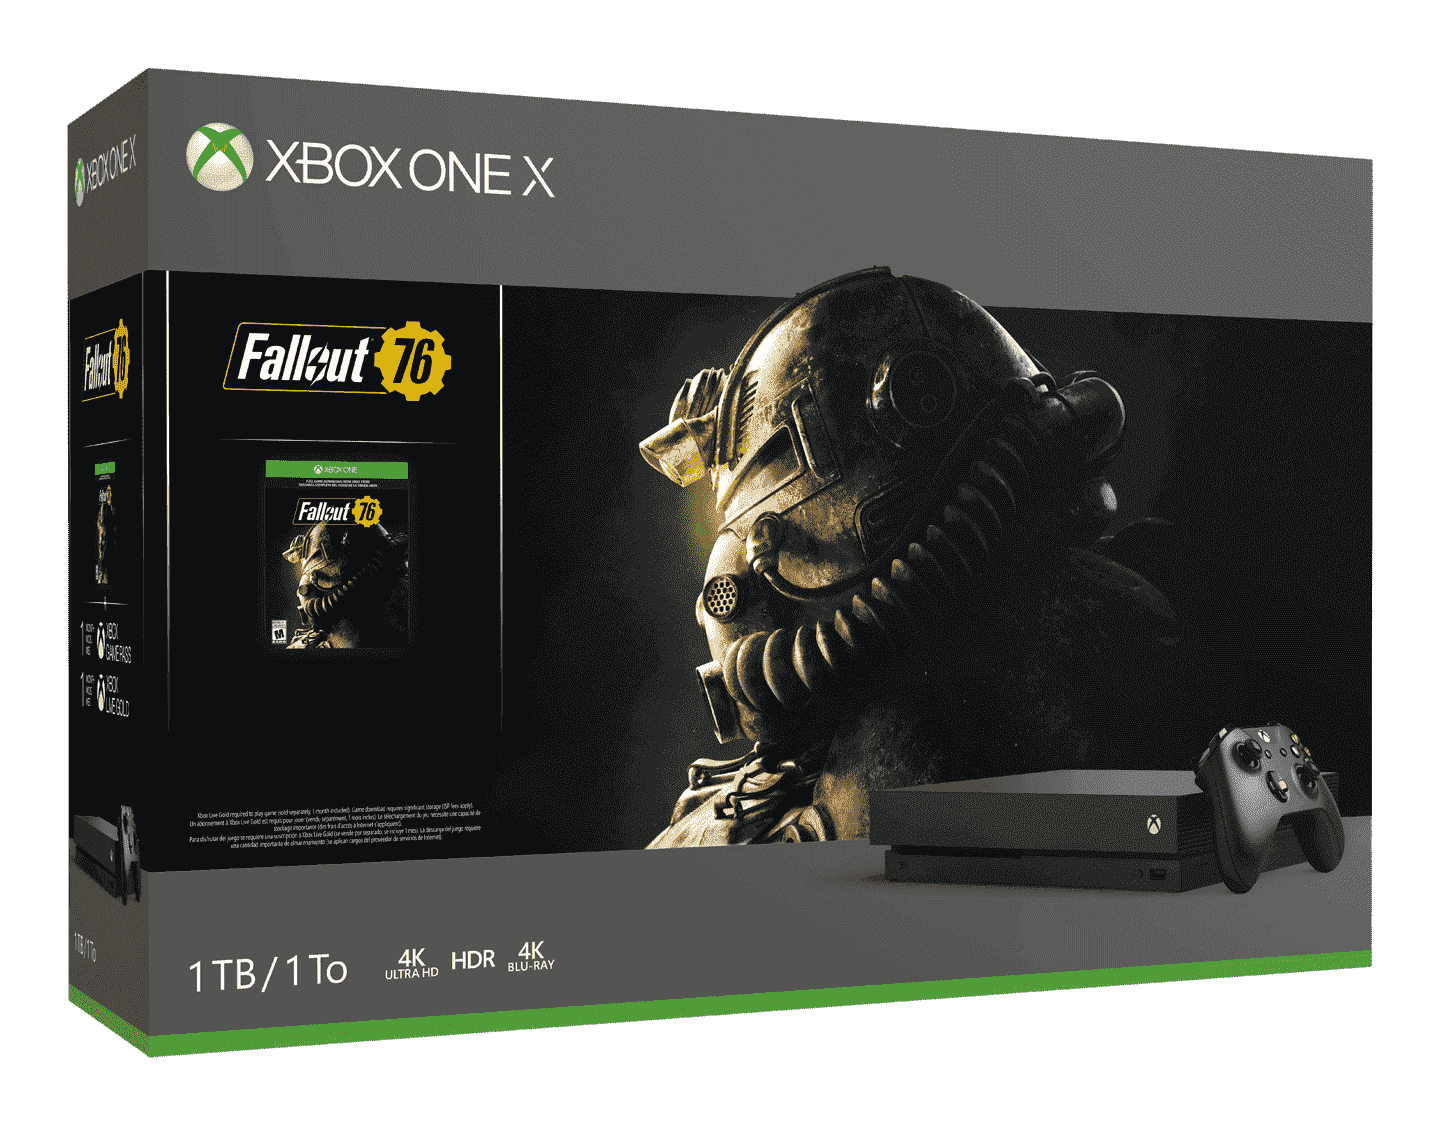 Fallout 76 B.E.T.A arrives on Xbox One on October 23, 2018 Xbox-One-X-Fallout-76-Bundle-Front-Angle-Box-Shot.png